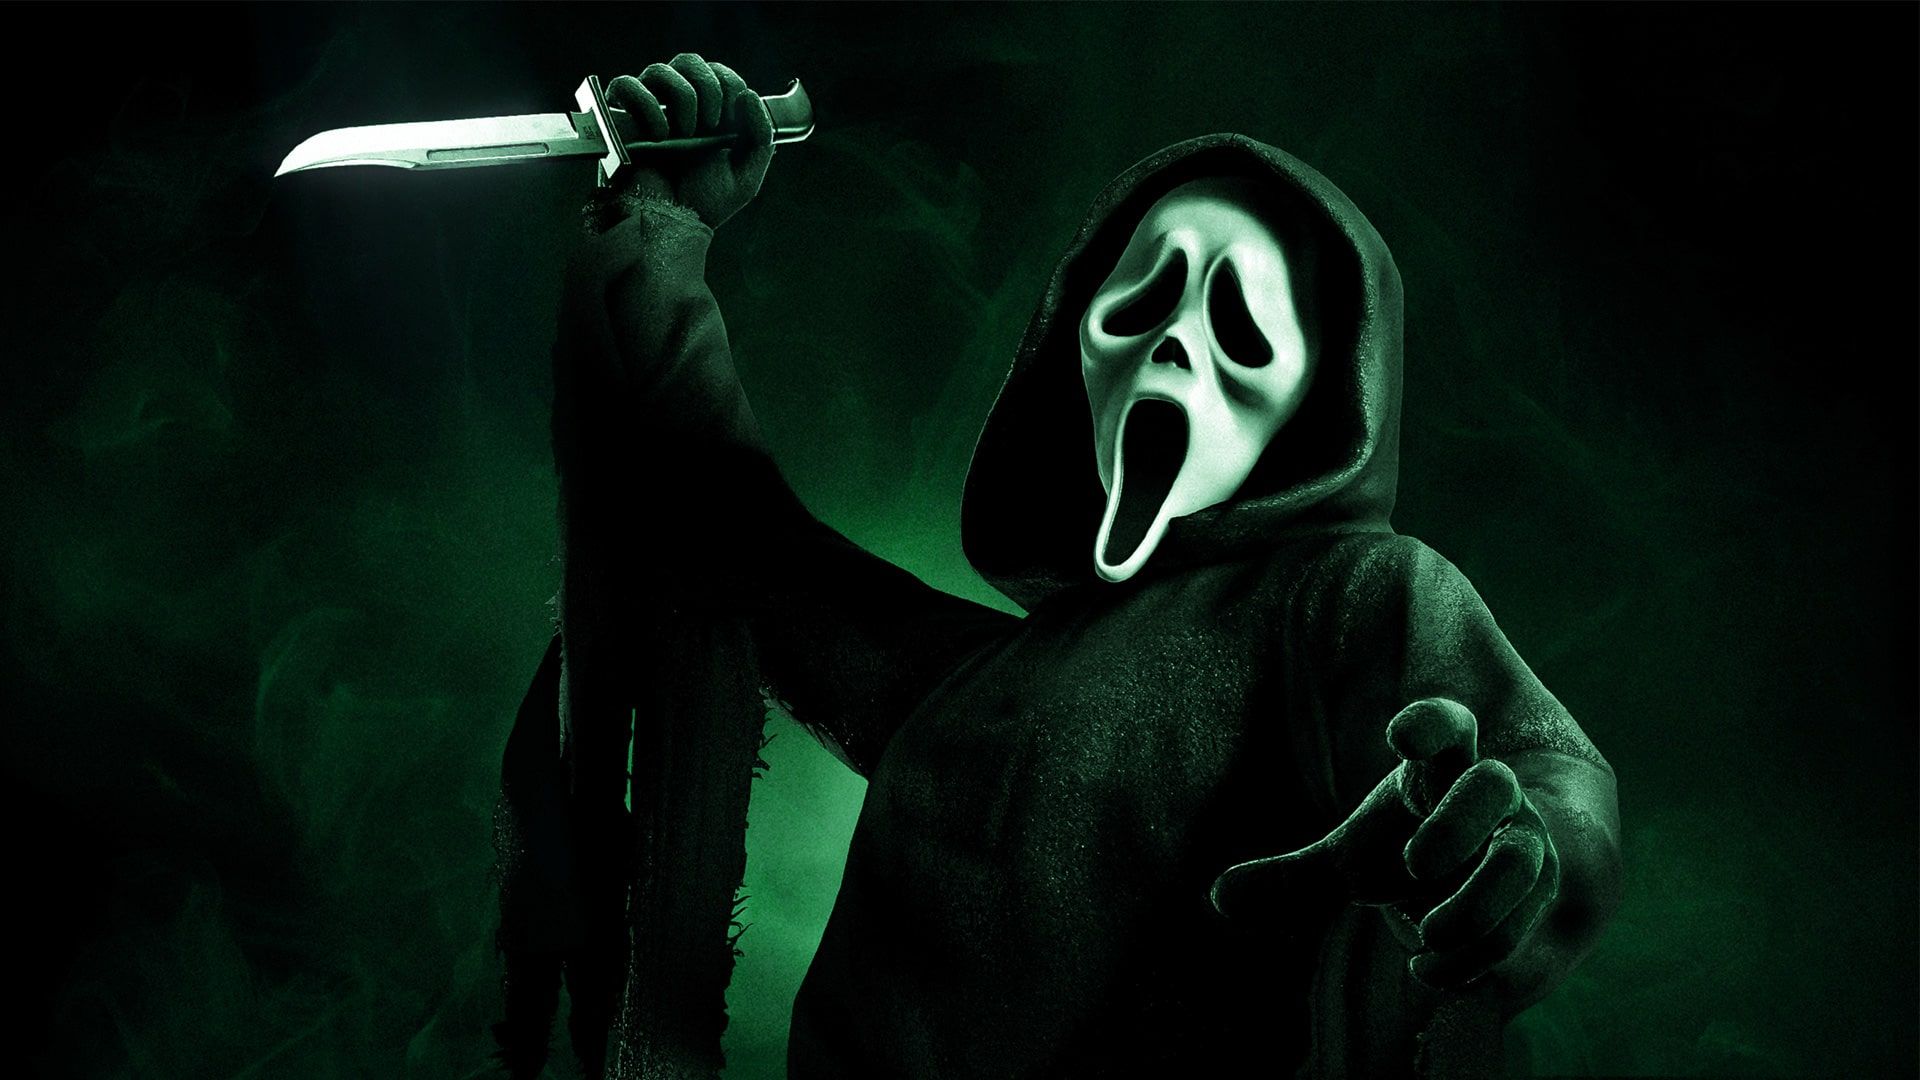 A man wearing a white ghostface mask and a black hooded sweatshirt with a knife in his hand - Ghostface